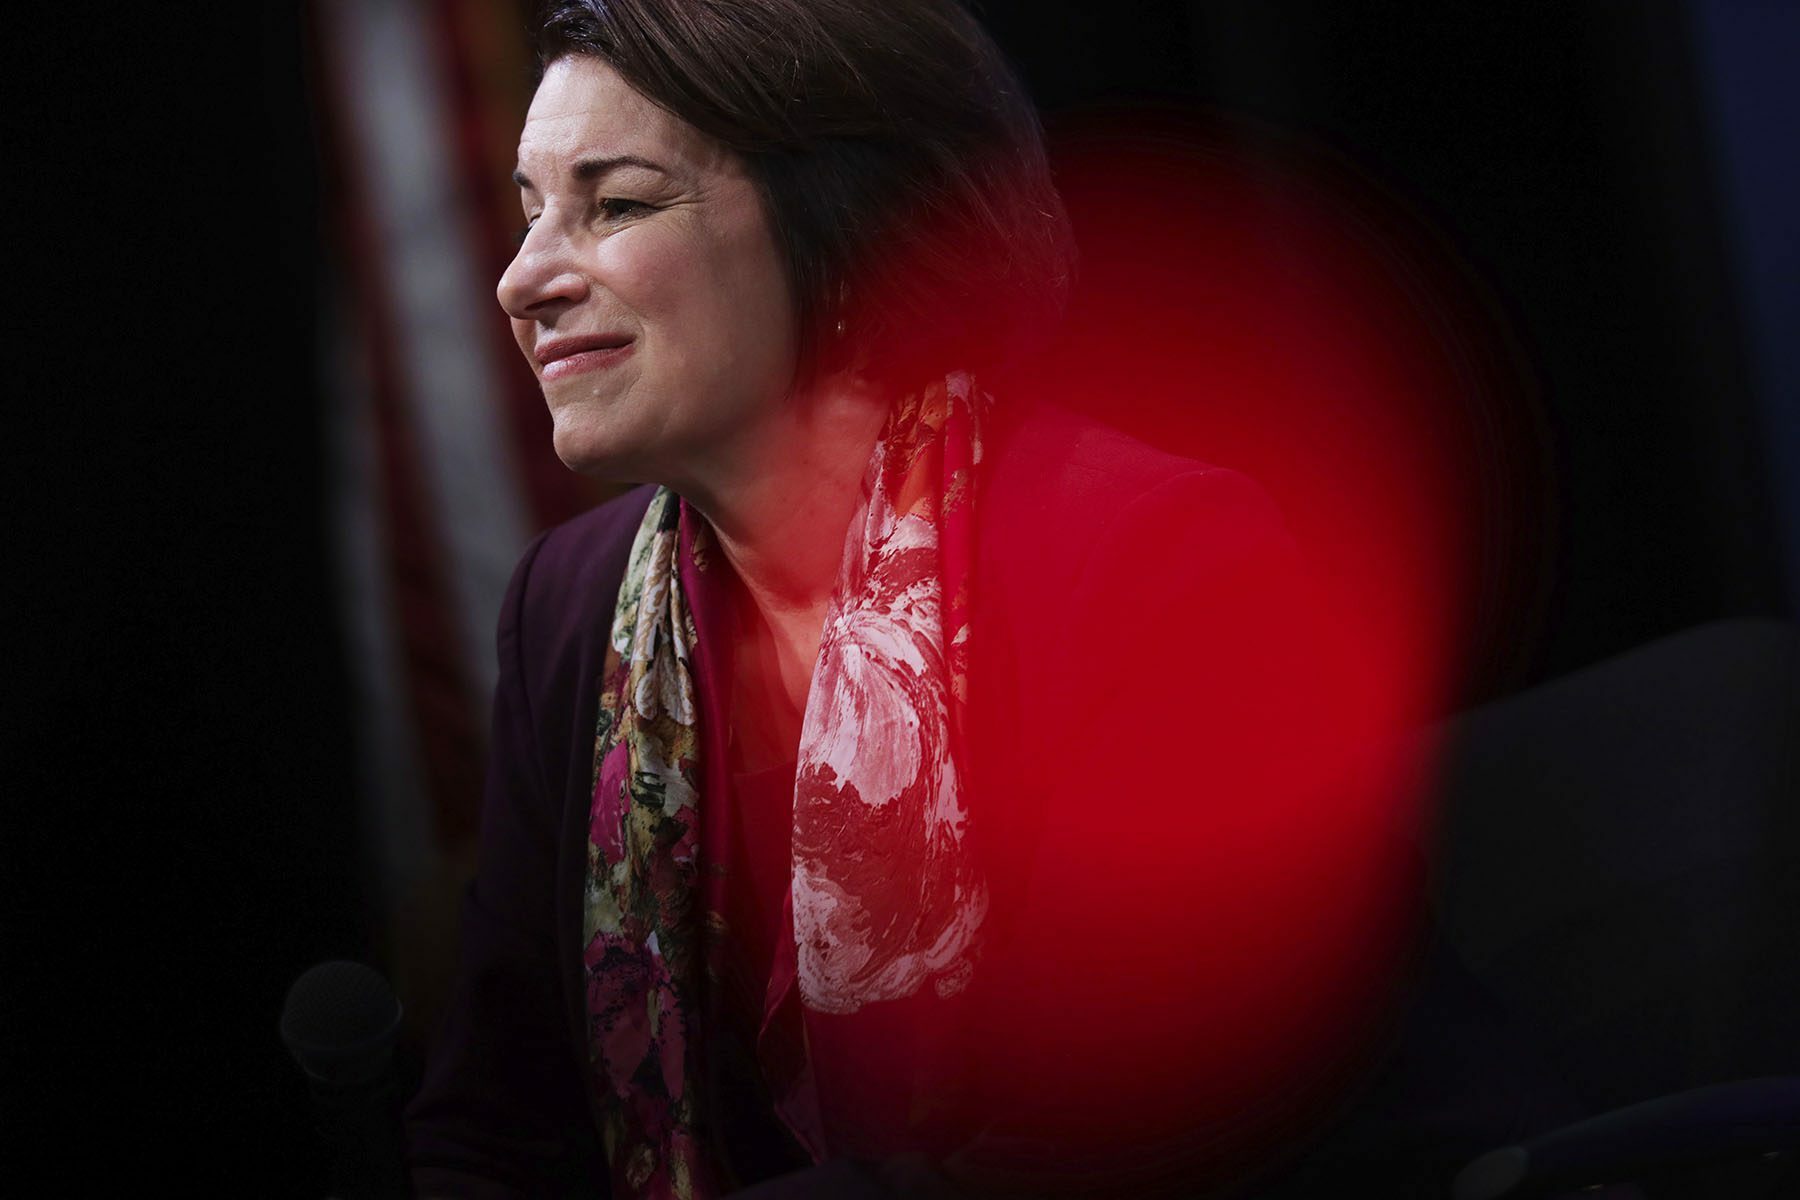 Sen. Amy Klobuchar looks to the side and smiles.